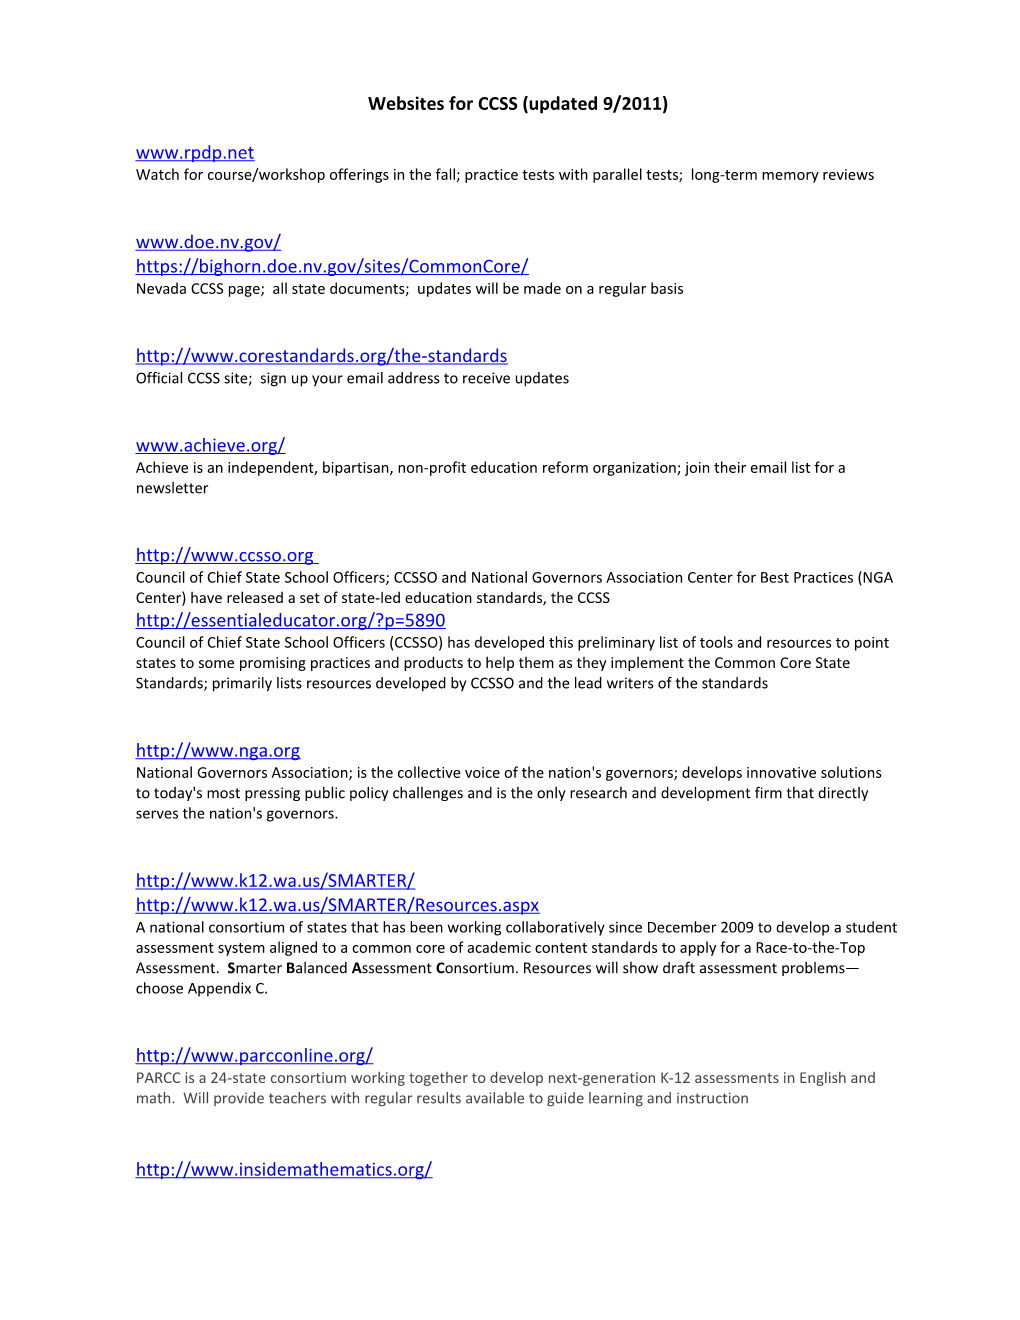 Websites for CCSS (Updated 9/2011)